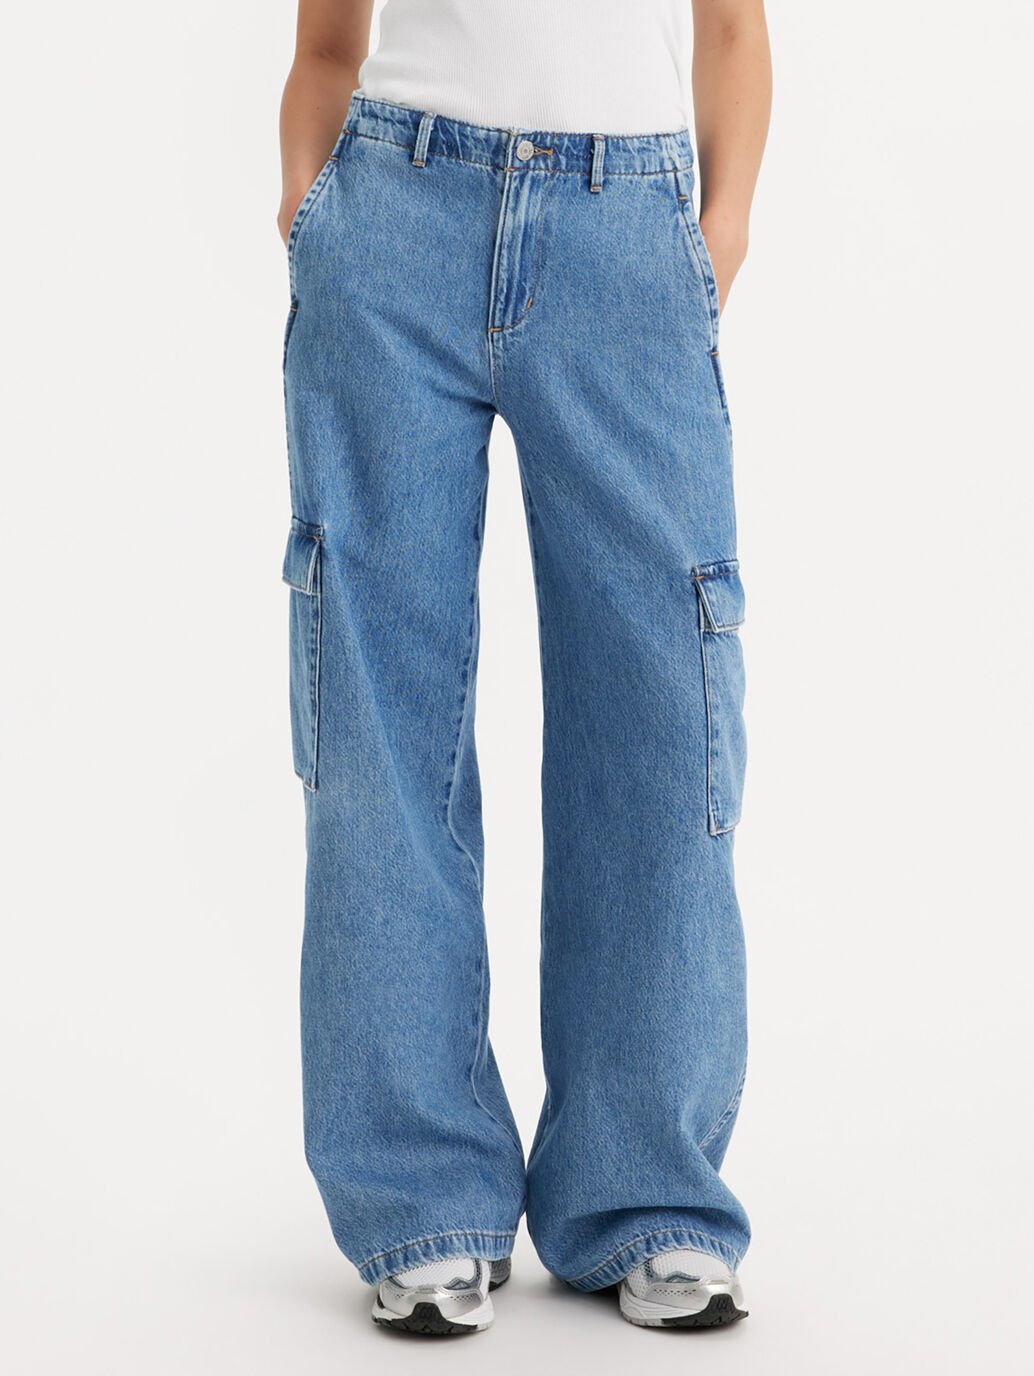 Levi's Womens Baggy Cargo Jeans